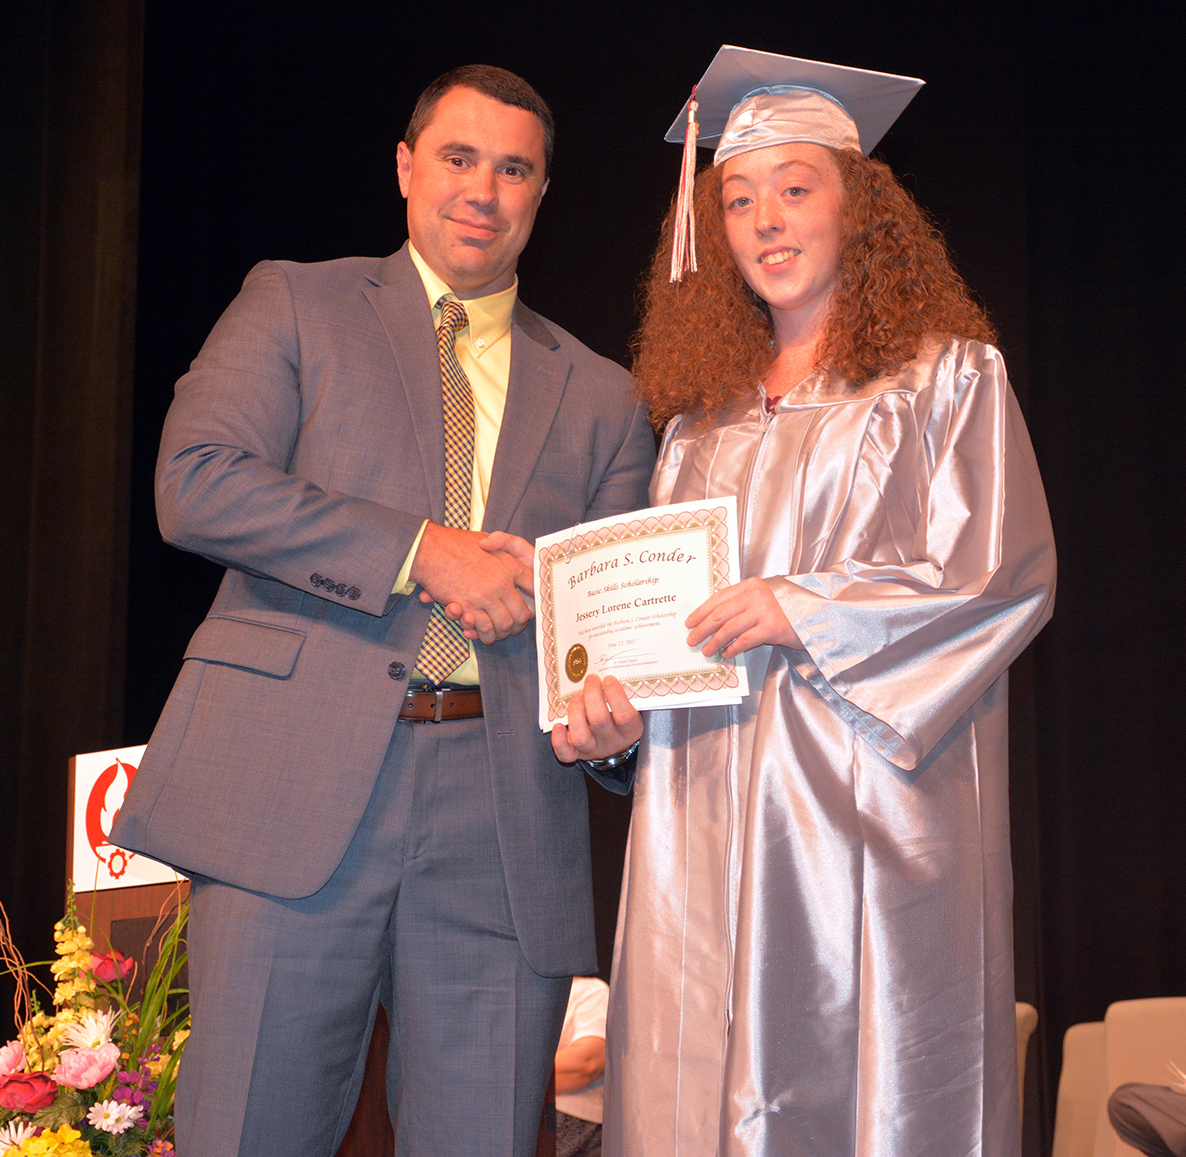 1 Jessery Cartrelle.jpg:  Pictured is Adult High School graduate Jessery Cartrelle receiving the Barbara S. Conder Basic Skills Scholarship. Presenting the scholarship is Dr. Robbie Taylor, vice president of the Workforce and Economic Development division at Richmond Community College